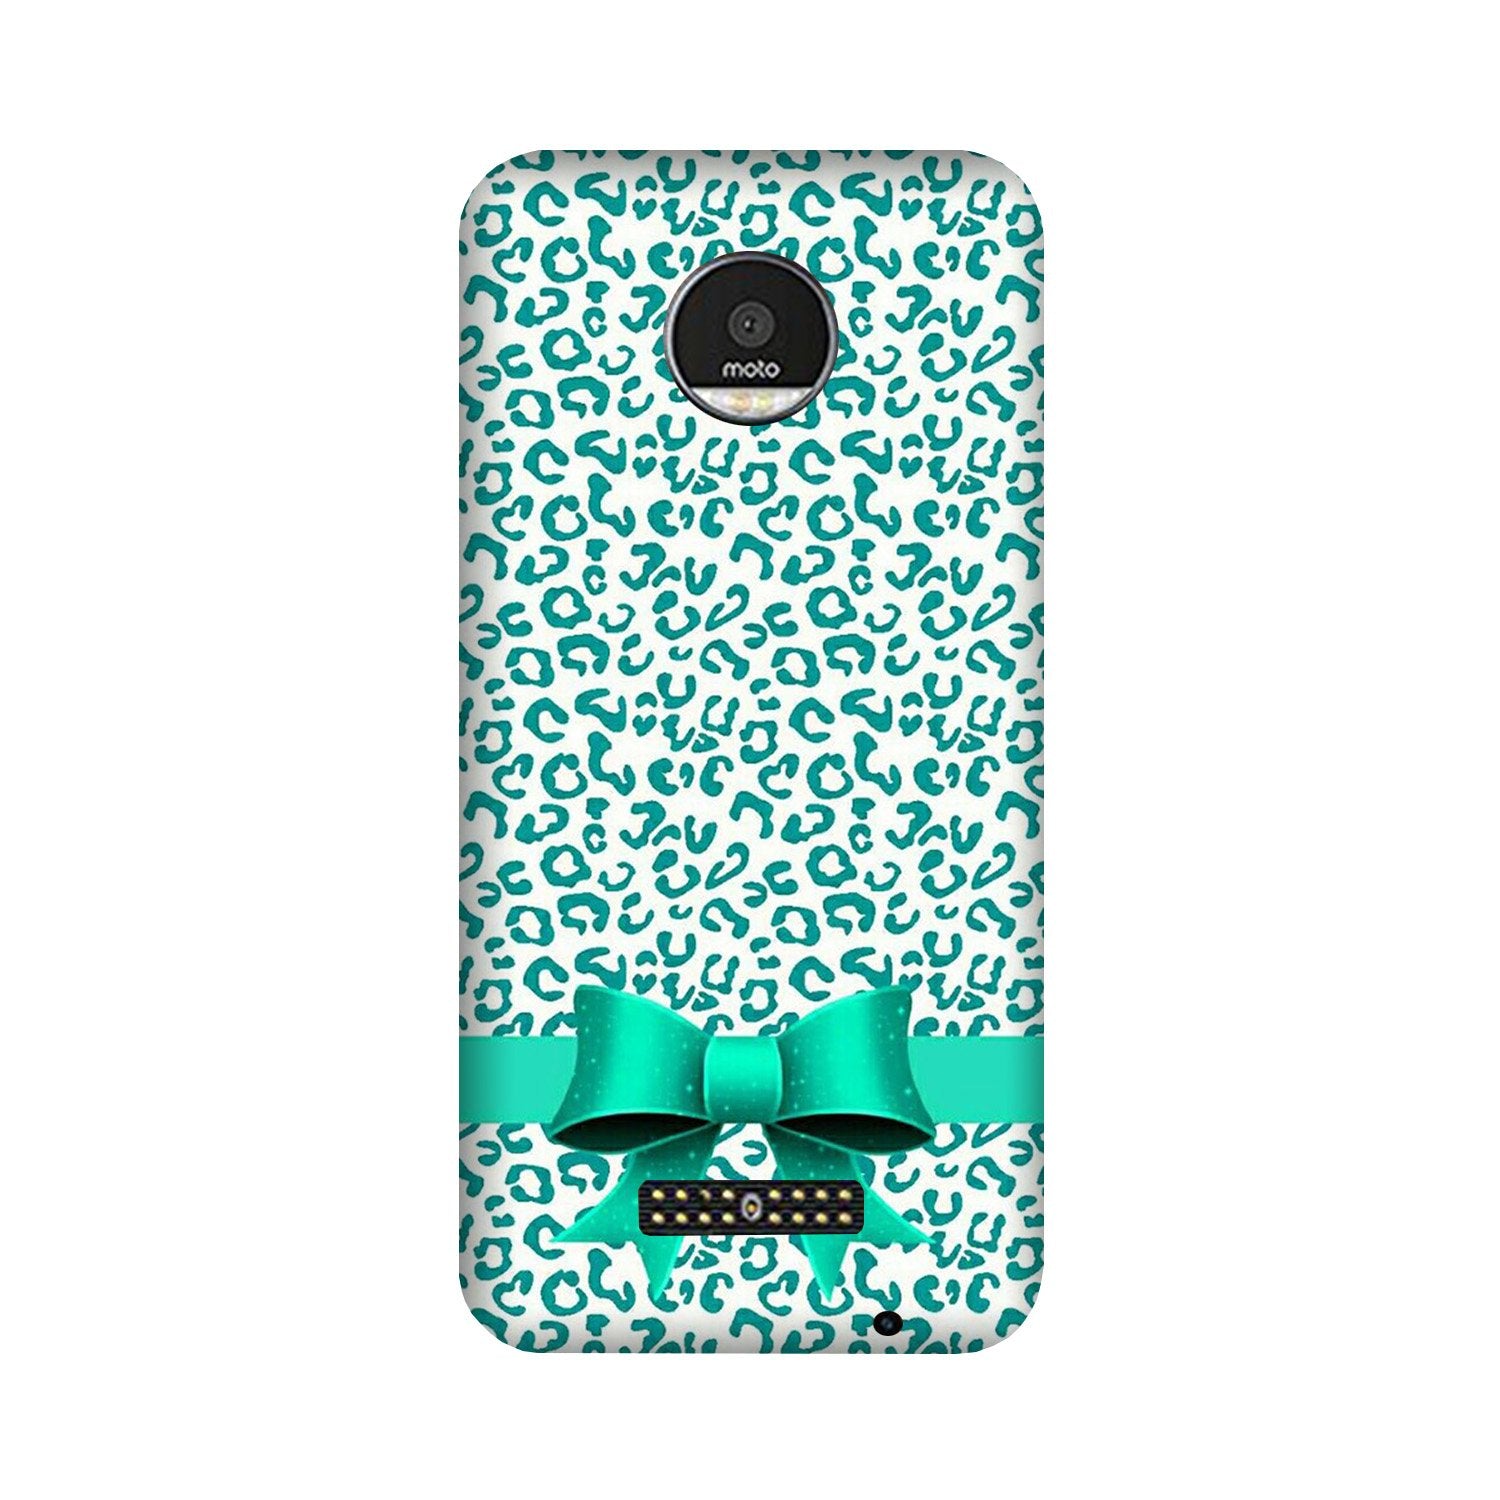 Gift Wrap6 Case for Moto Z Play